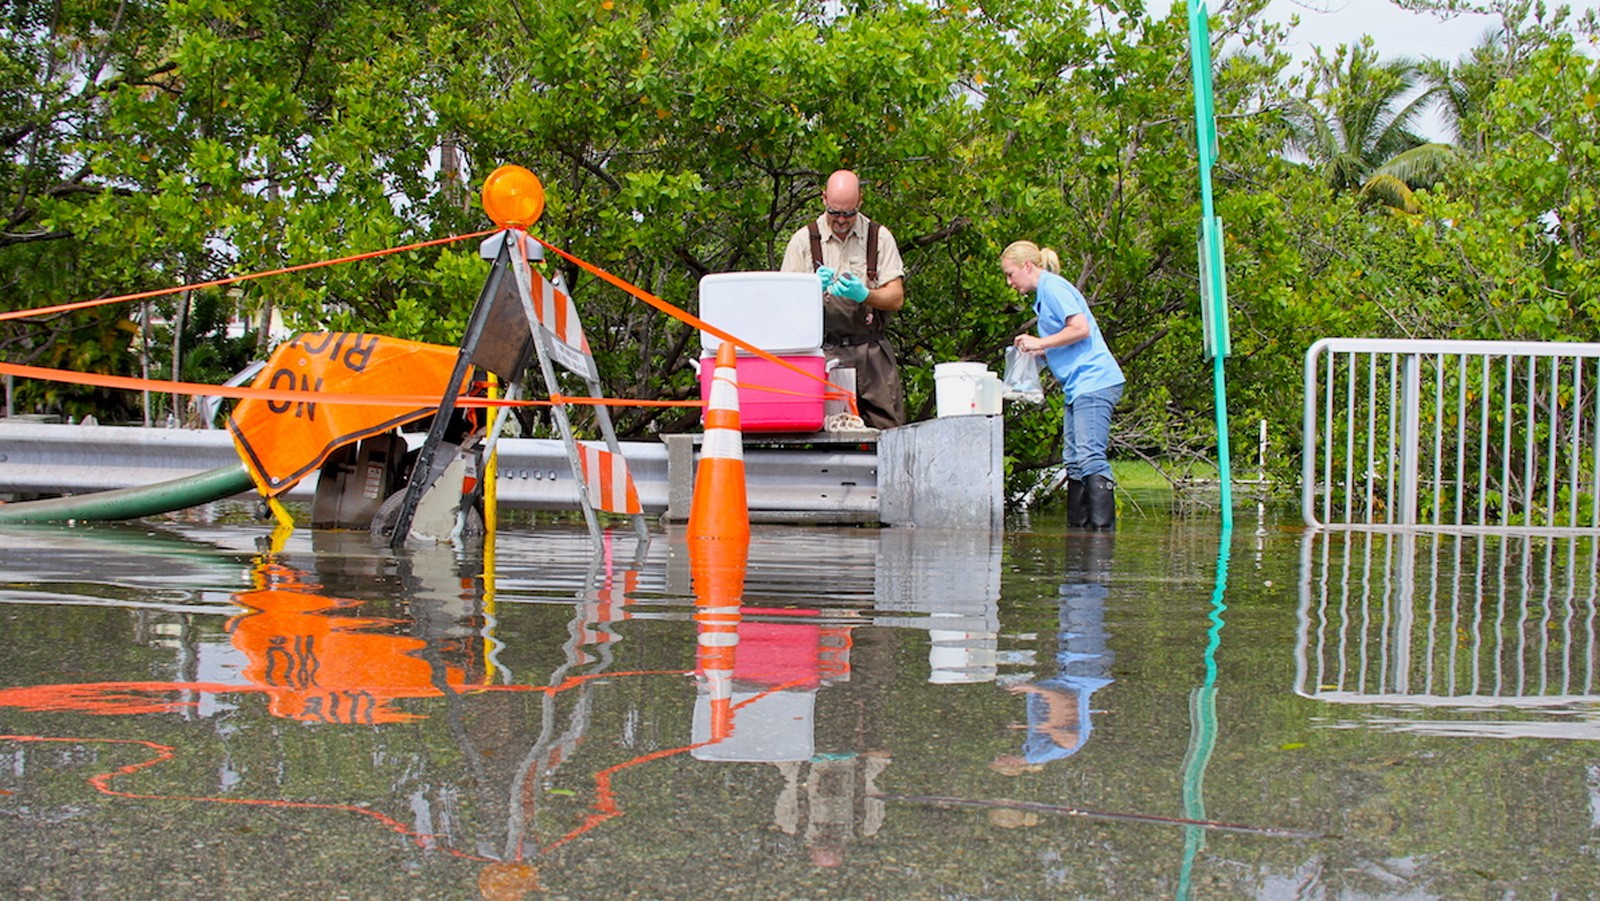 Scientists from FAU and AOML collect water samples at a pumping location along Indian Creek Dr. Image credit: NOAA